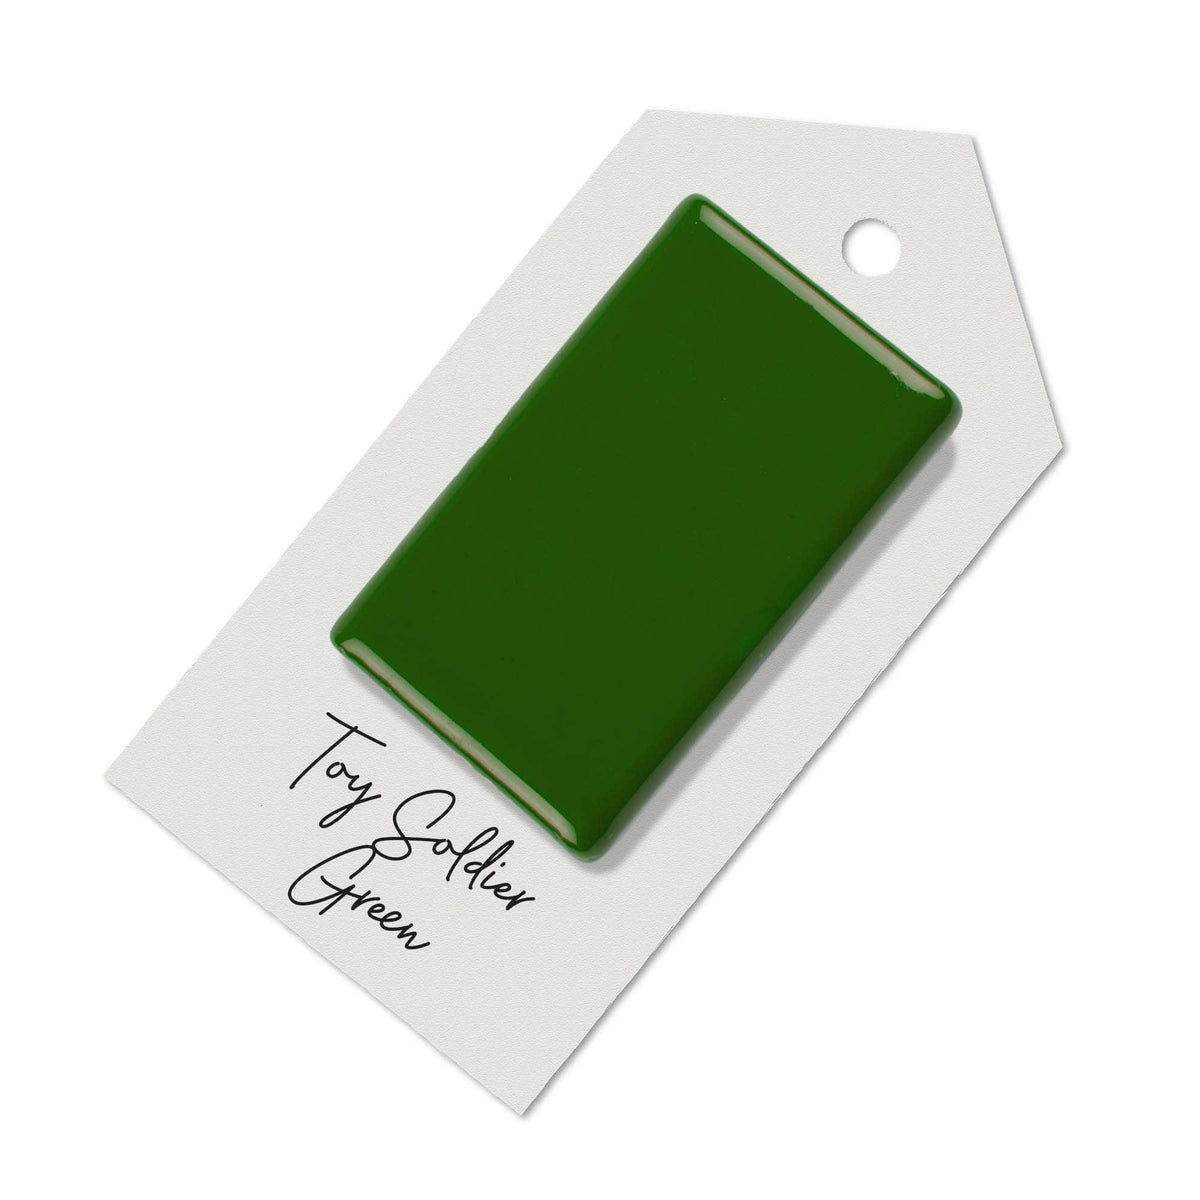 Toy Soldier Green sample for Aga range cooker re-enamelling &amp; reconditioned cookers